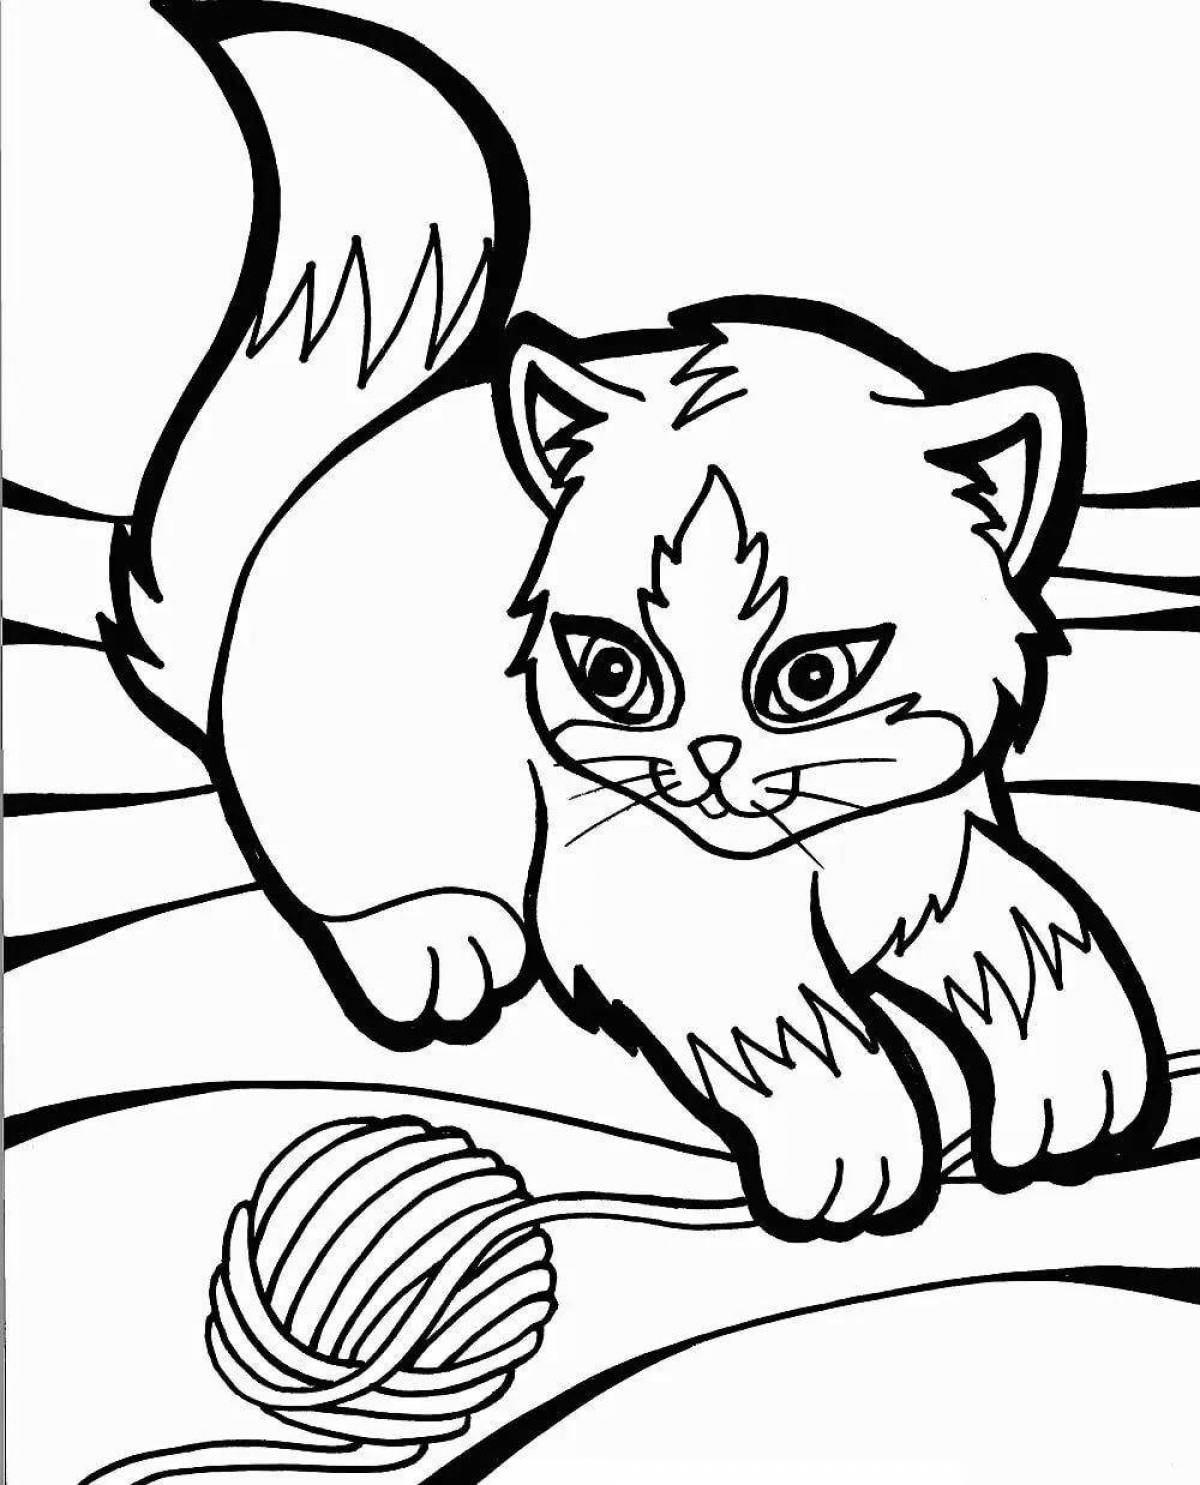 Crazy cat coloring for kids